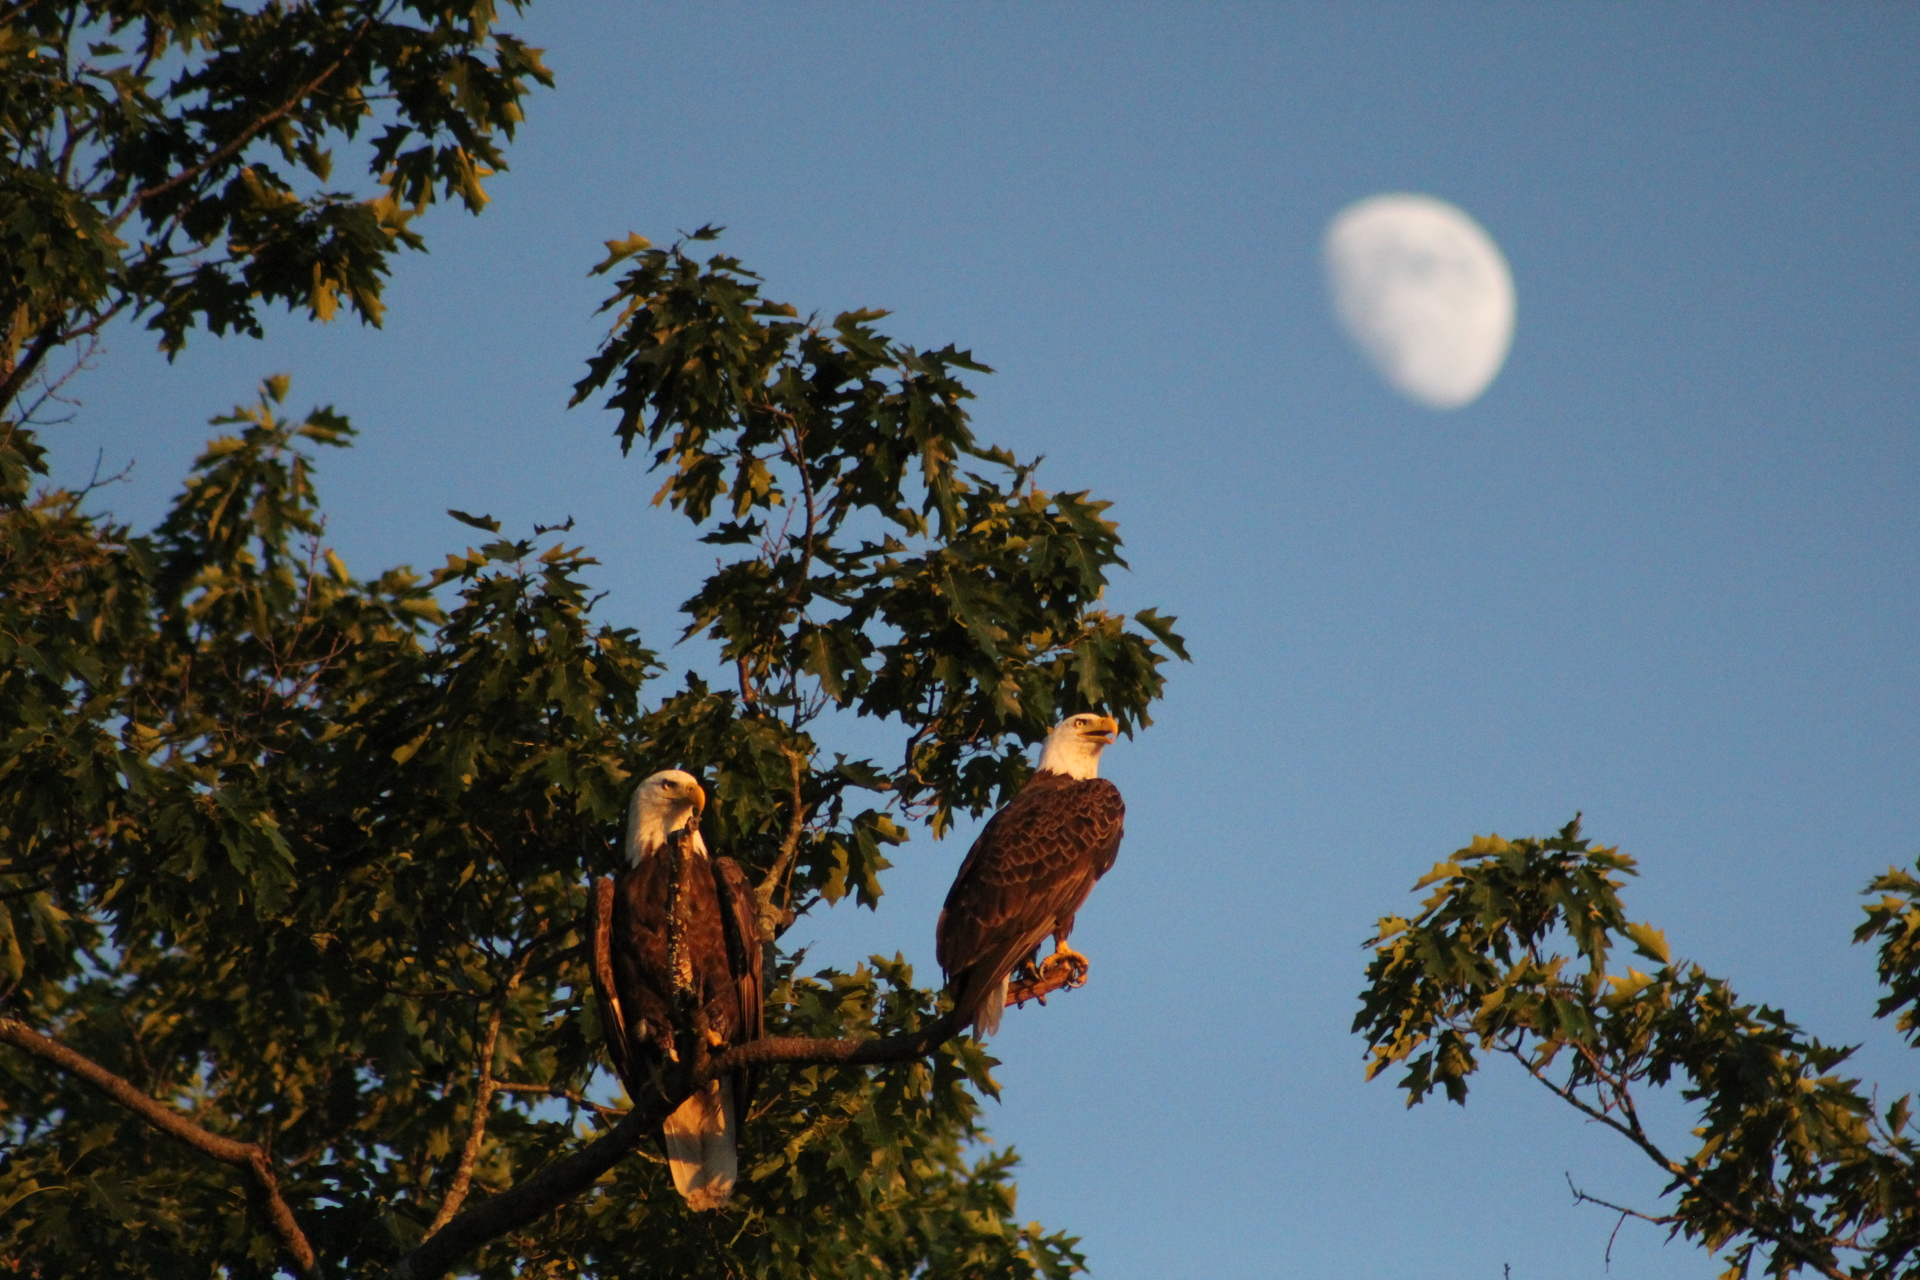 Two Bald Eagles perched in a tree. The moon is illuminated behind them.